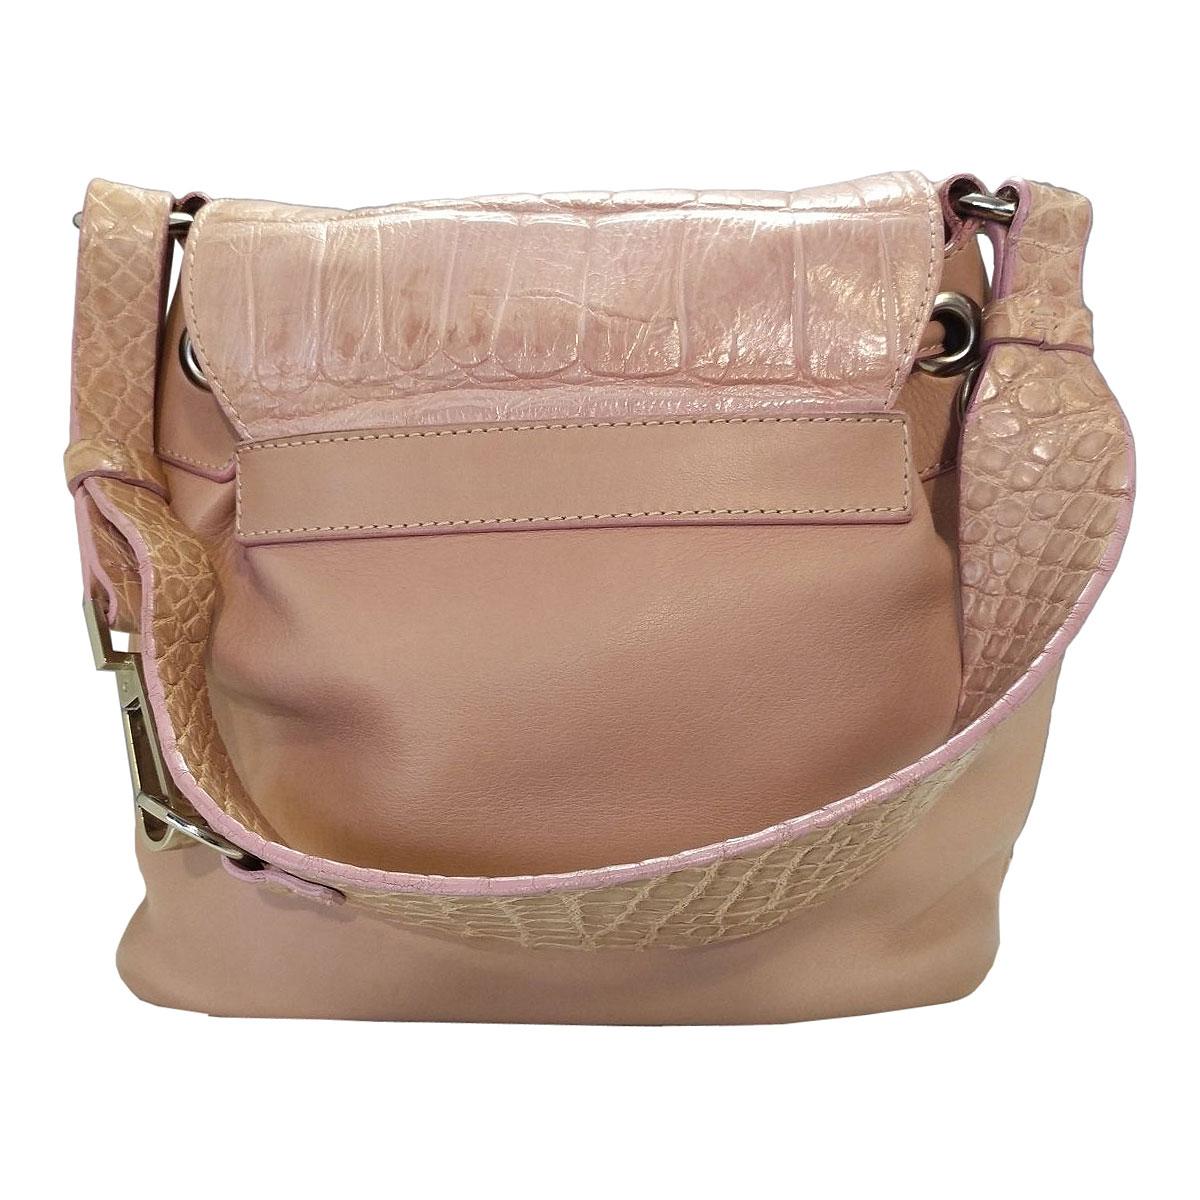 Super elegant bag, backpack inspired 
Leather and crocodile leather
Pink color
Single handle
Double external pocket
Internal zip pocket
Choke closure with magnet
Suede interior
Cm 23 x 21 x 10 (9,05 x 8,26 x 3,93 inches)
Presence of a small pen mark